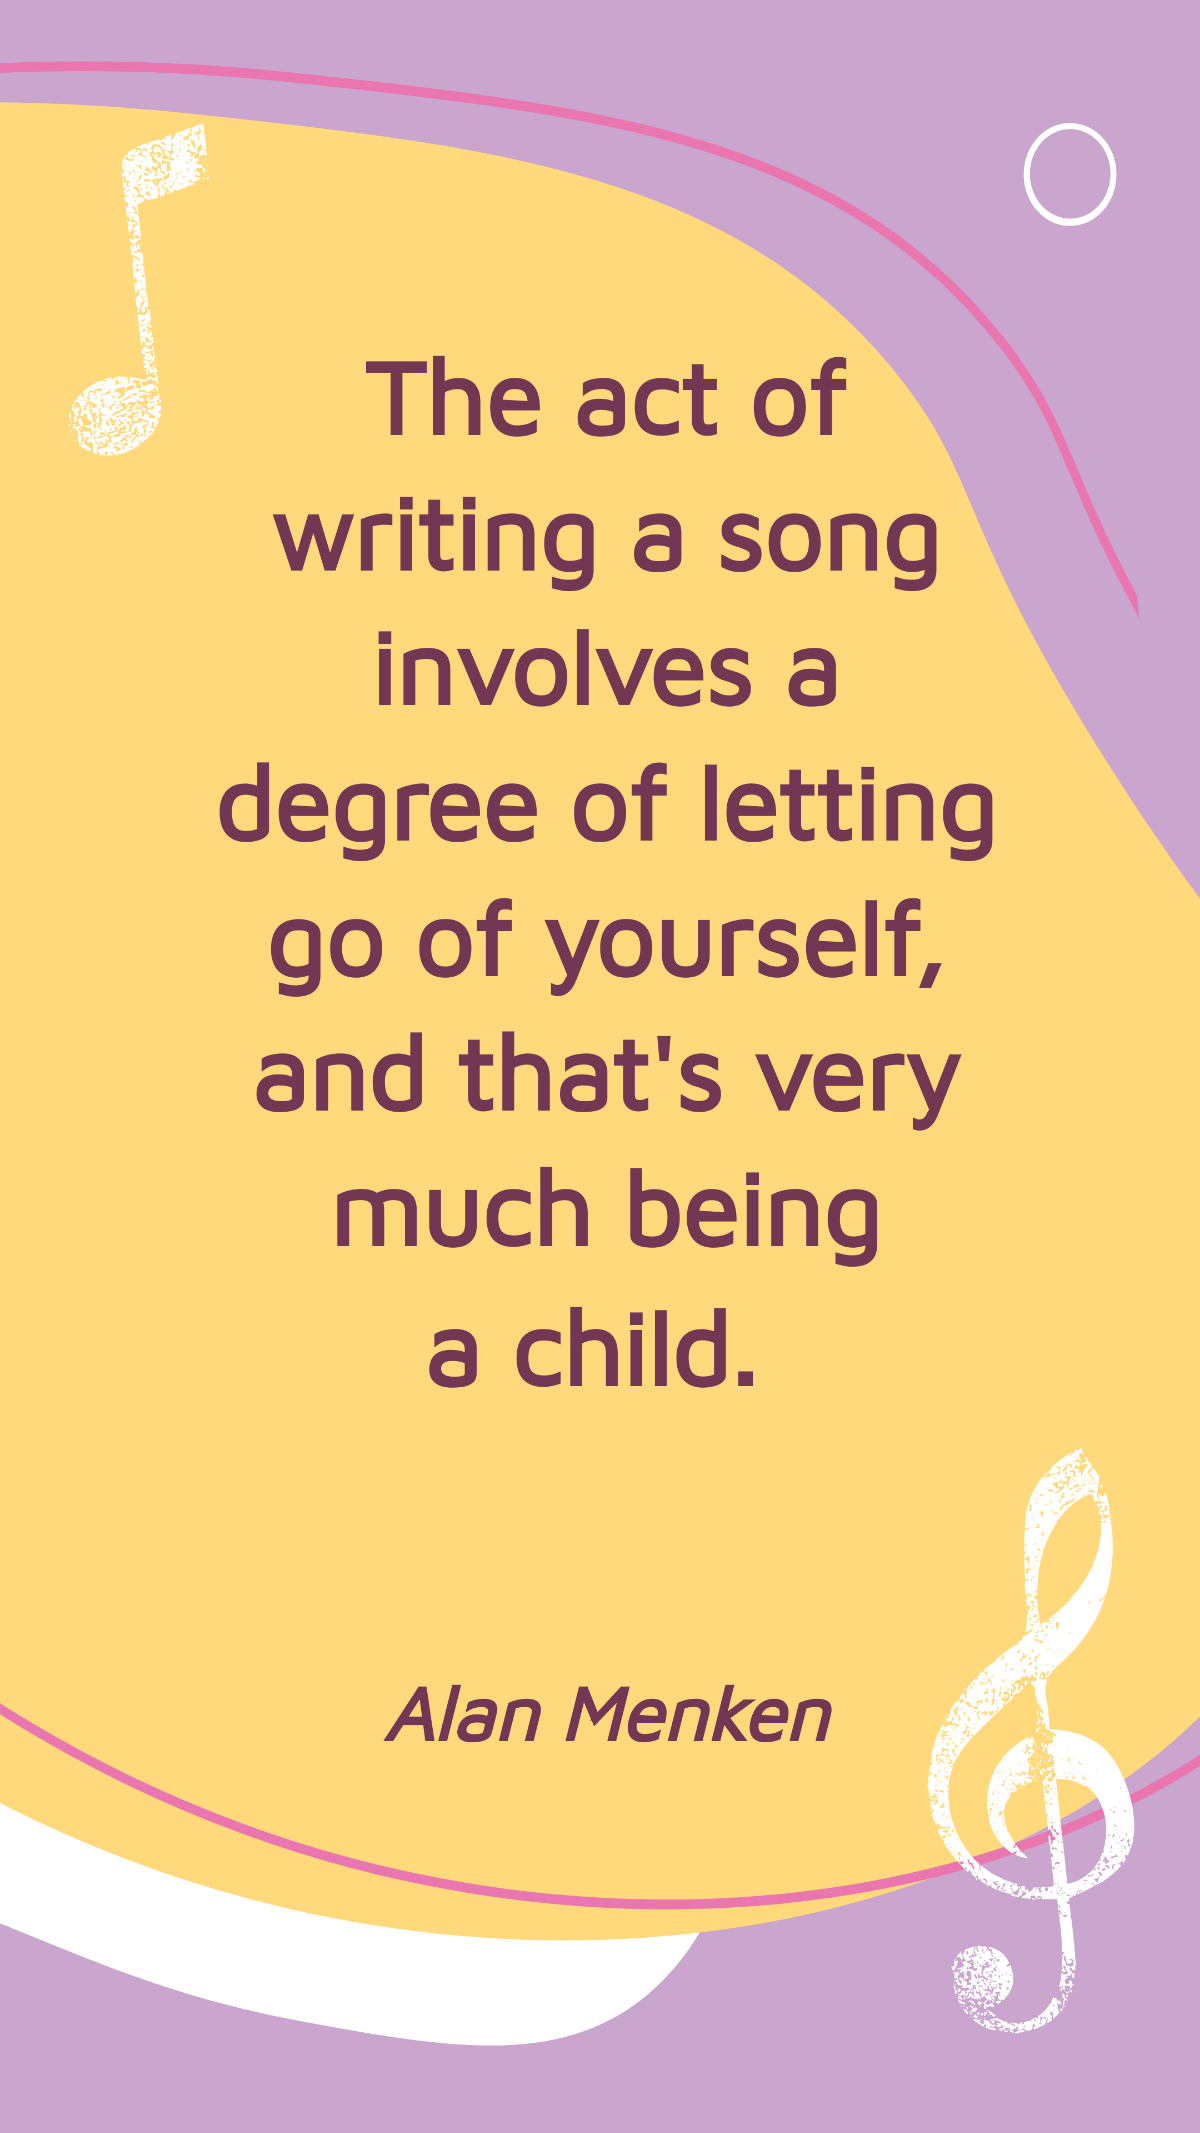 Alan Menken - The act of writing a song involves a degree of letting go of yourself, and that's very much being a child.